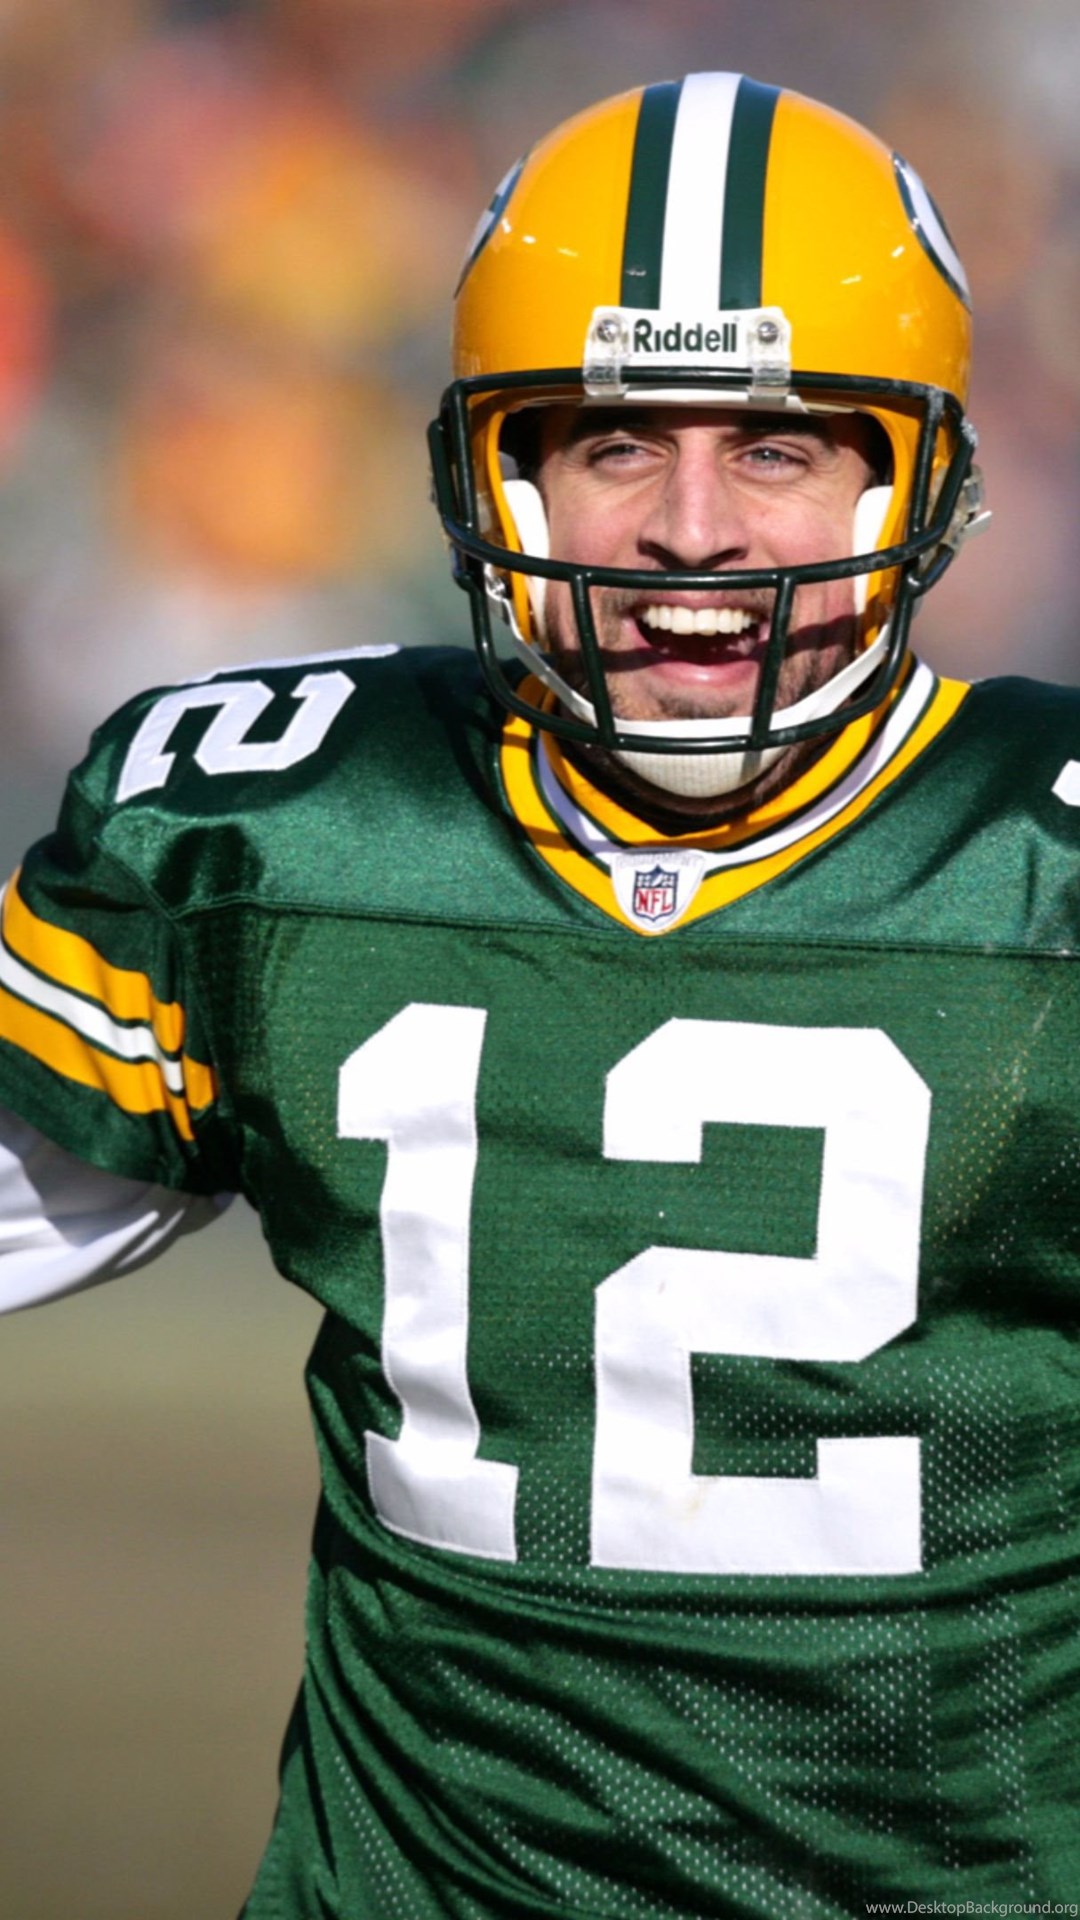 Download Amazing 2016 Aaron Rodgers 4K Wallpapers Mobile, Android, Tablet A...